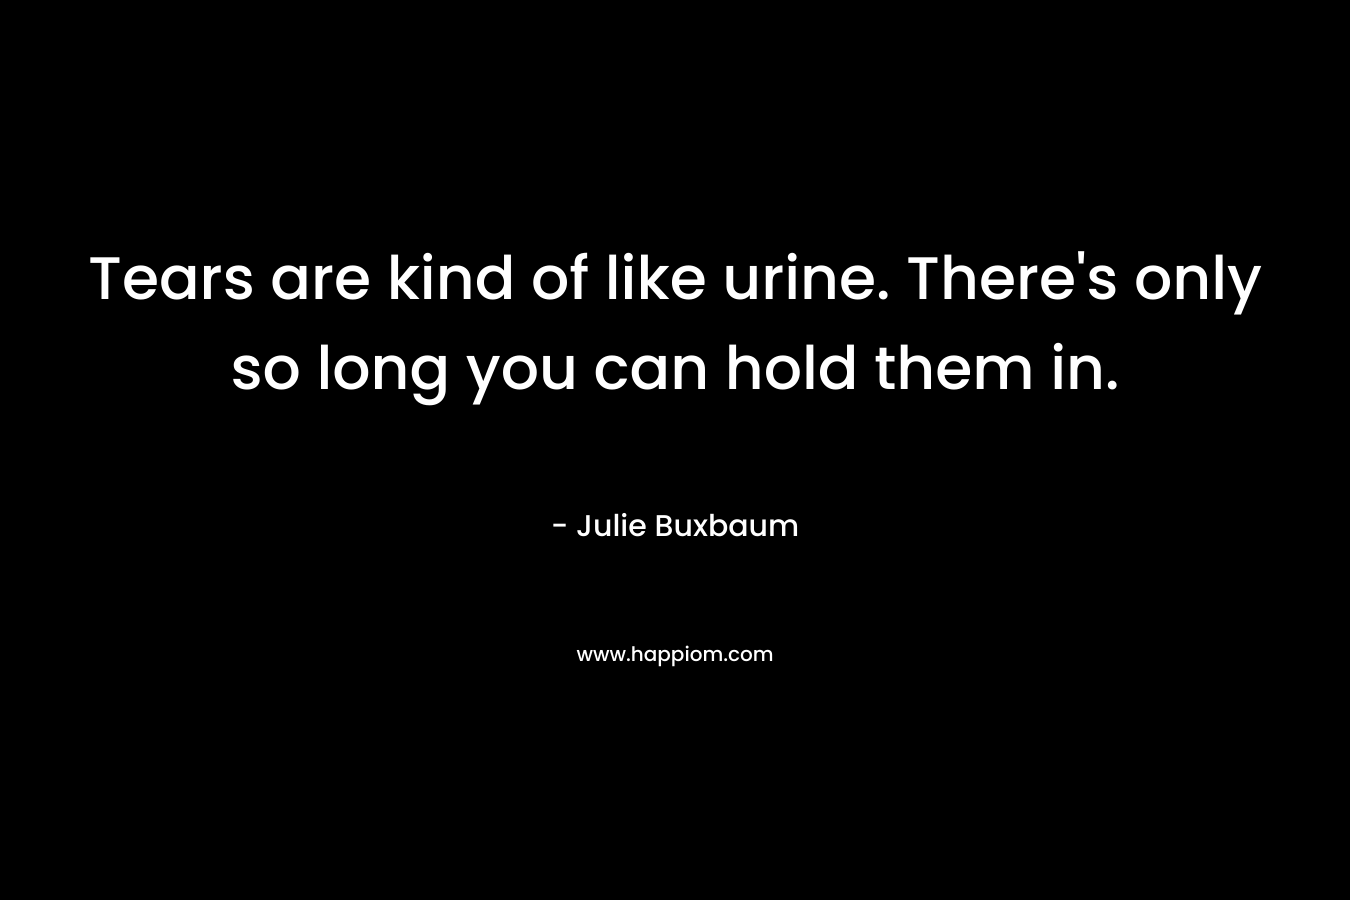 Tears are kind of like urine. There’s only so long you can hold them in. – Julie Buxbaum